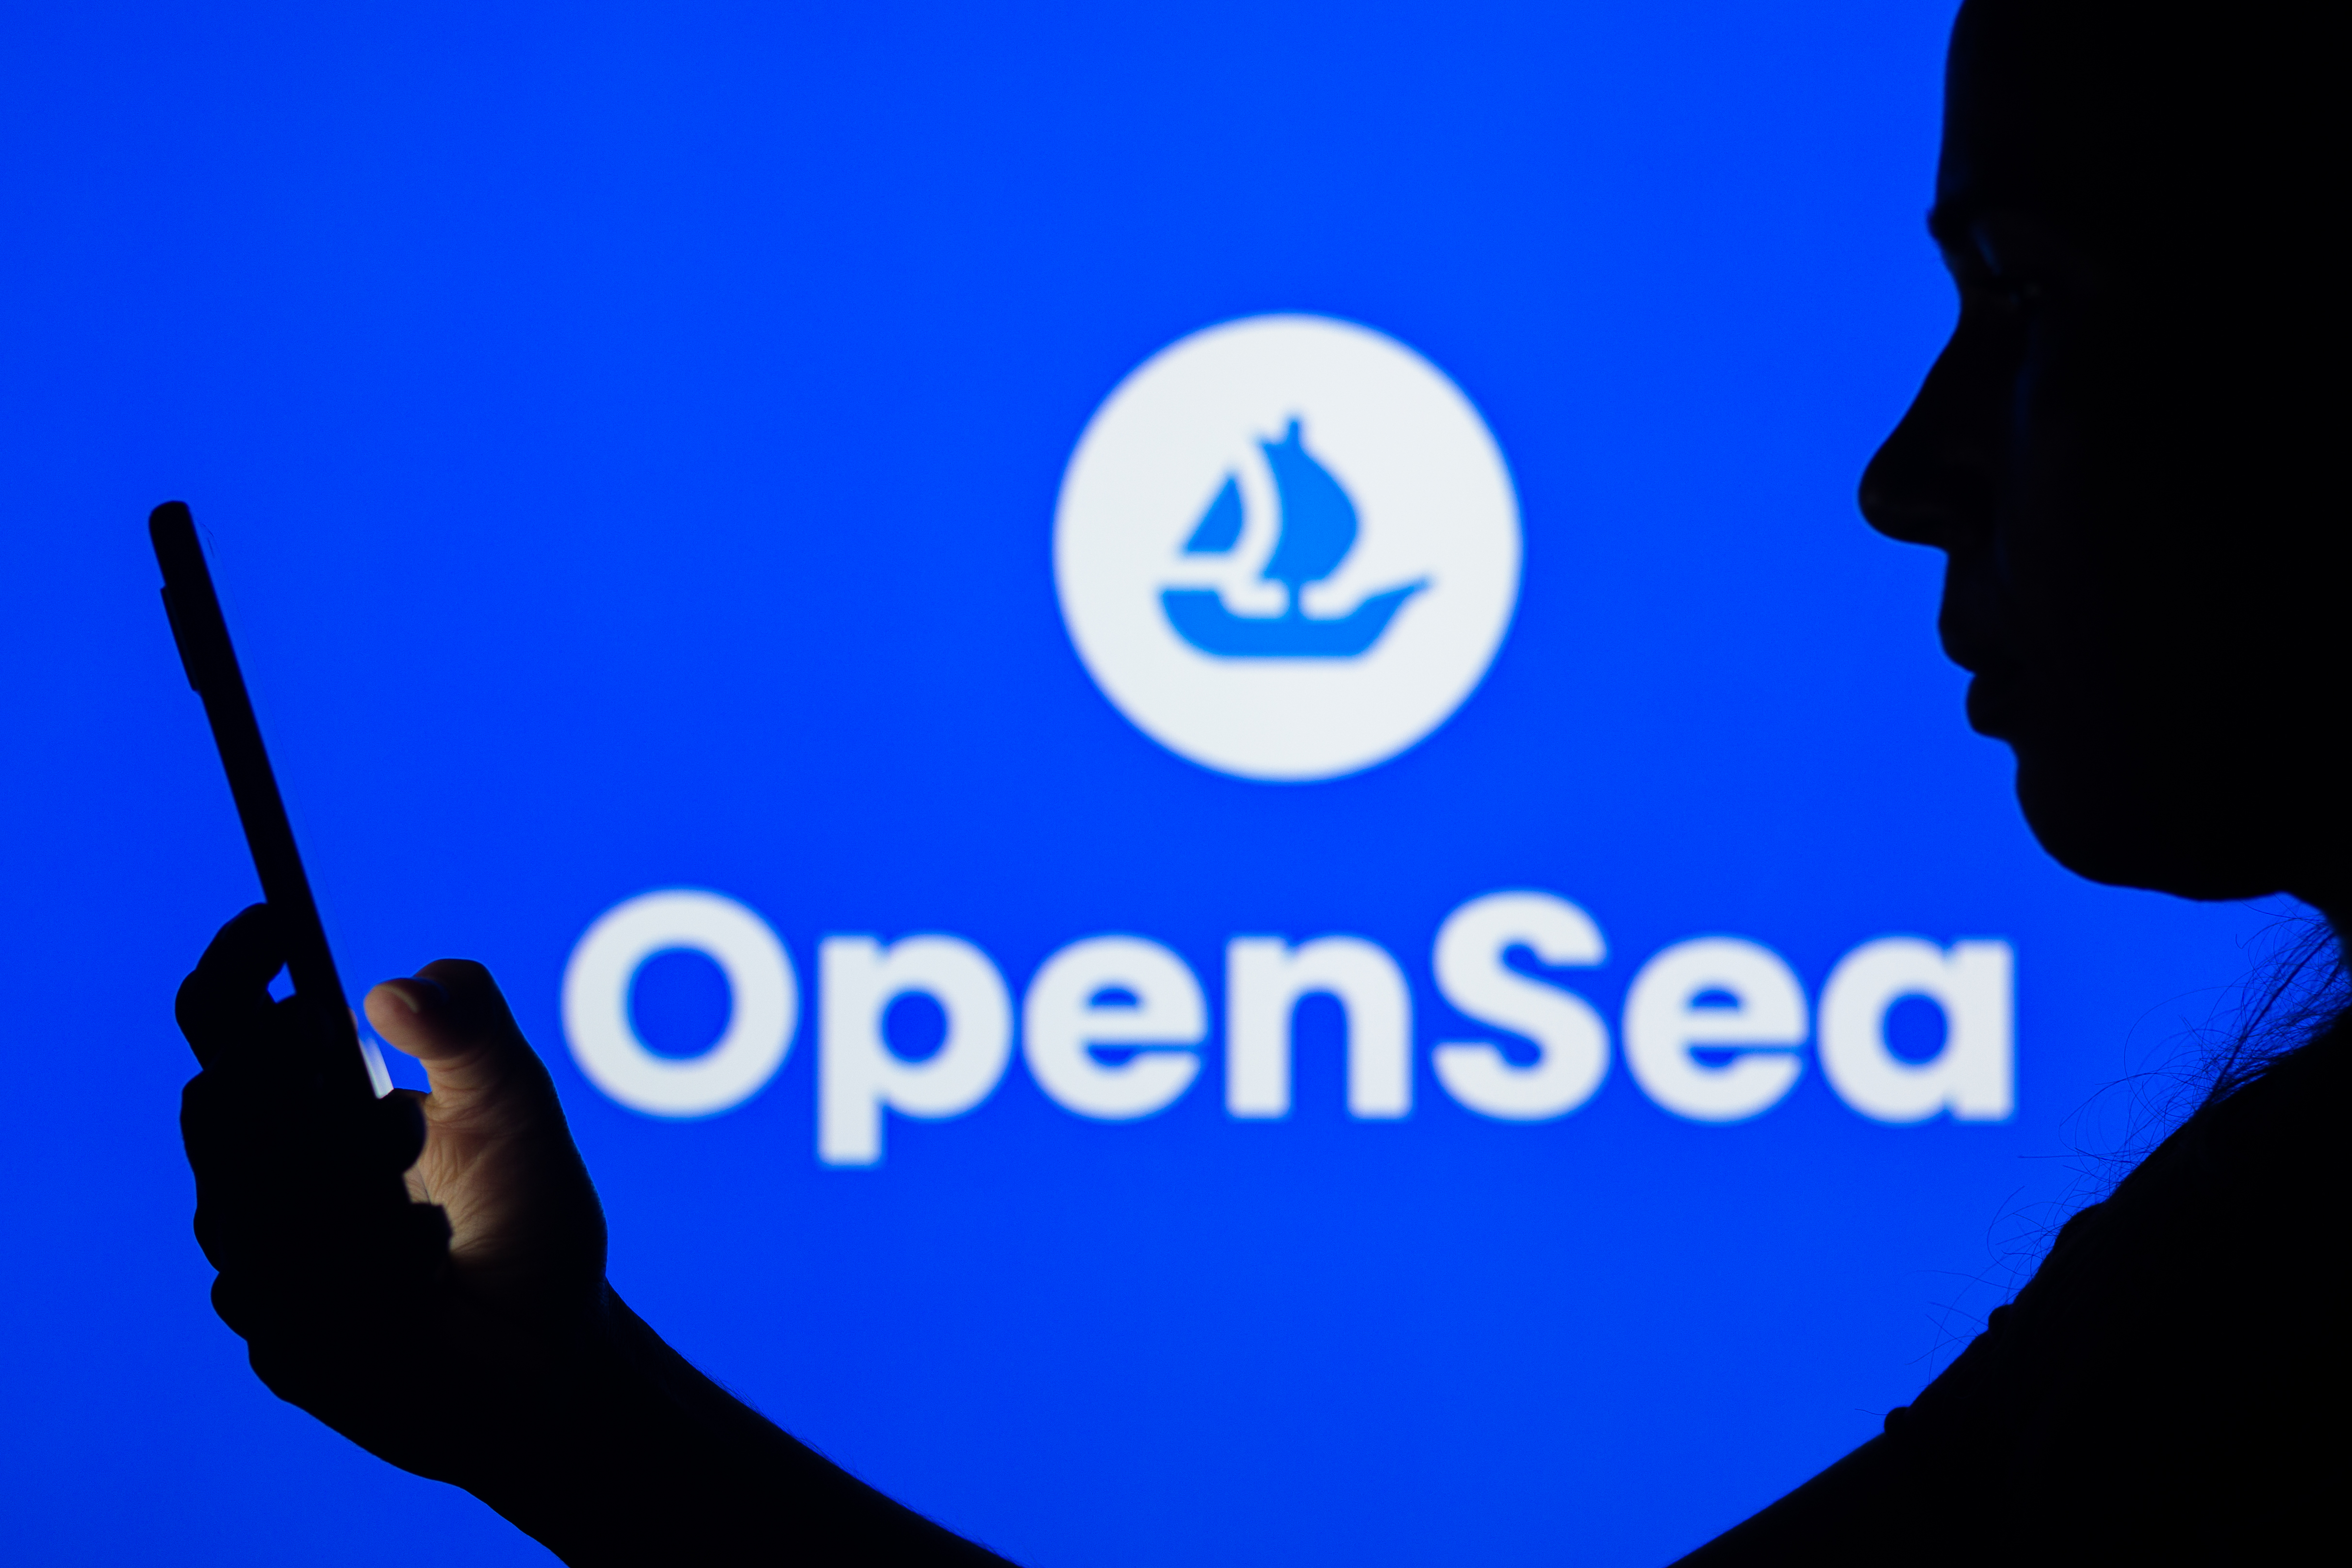 Latest OpenSea Attack Sees Hacker Infiltrate Discord - Crypto Briefing